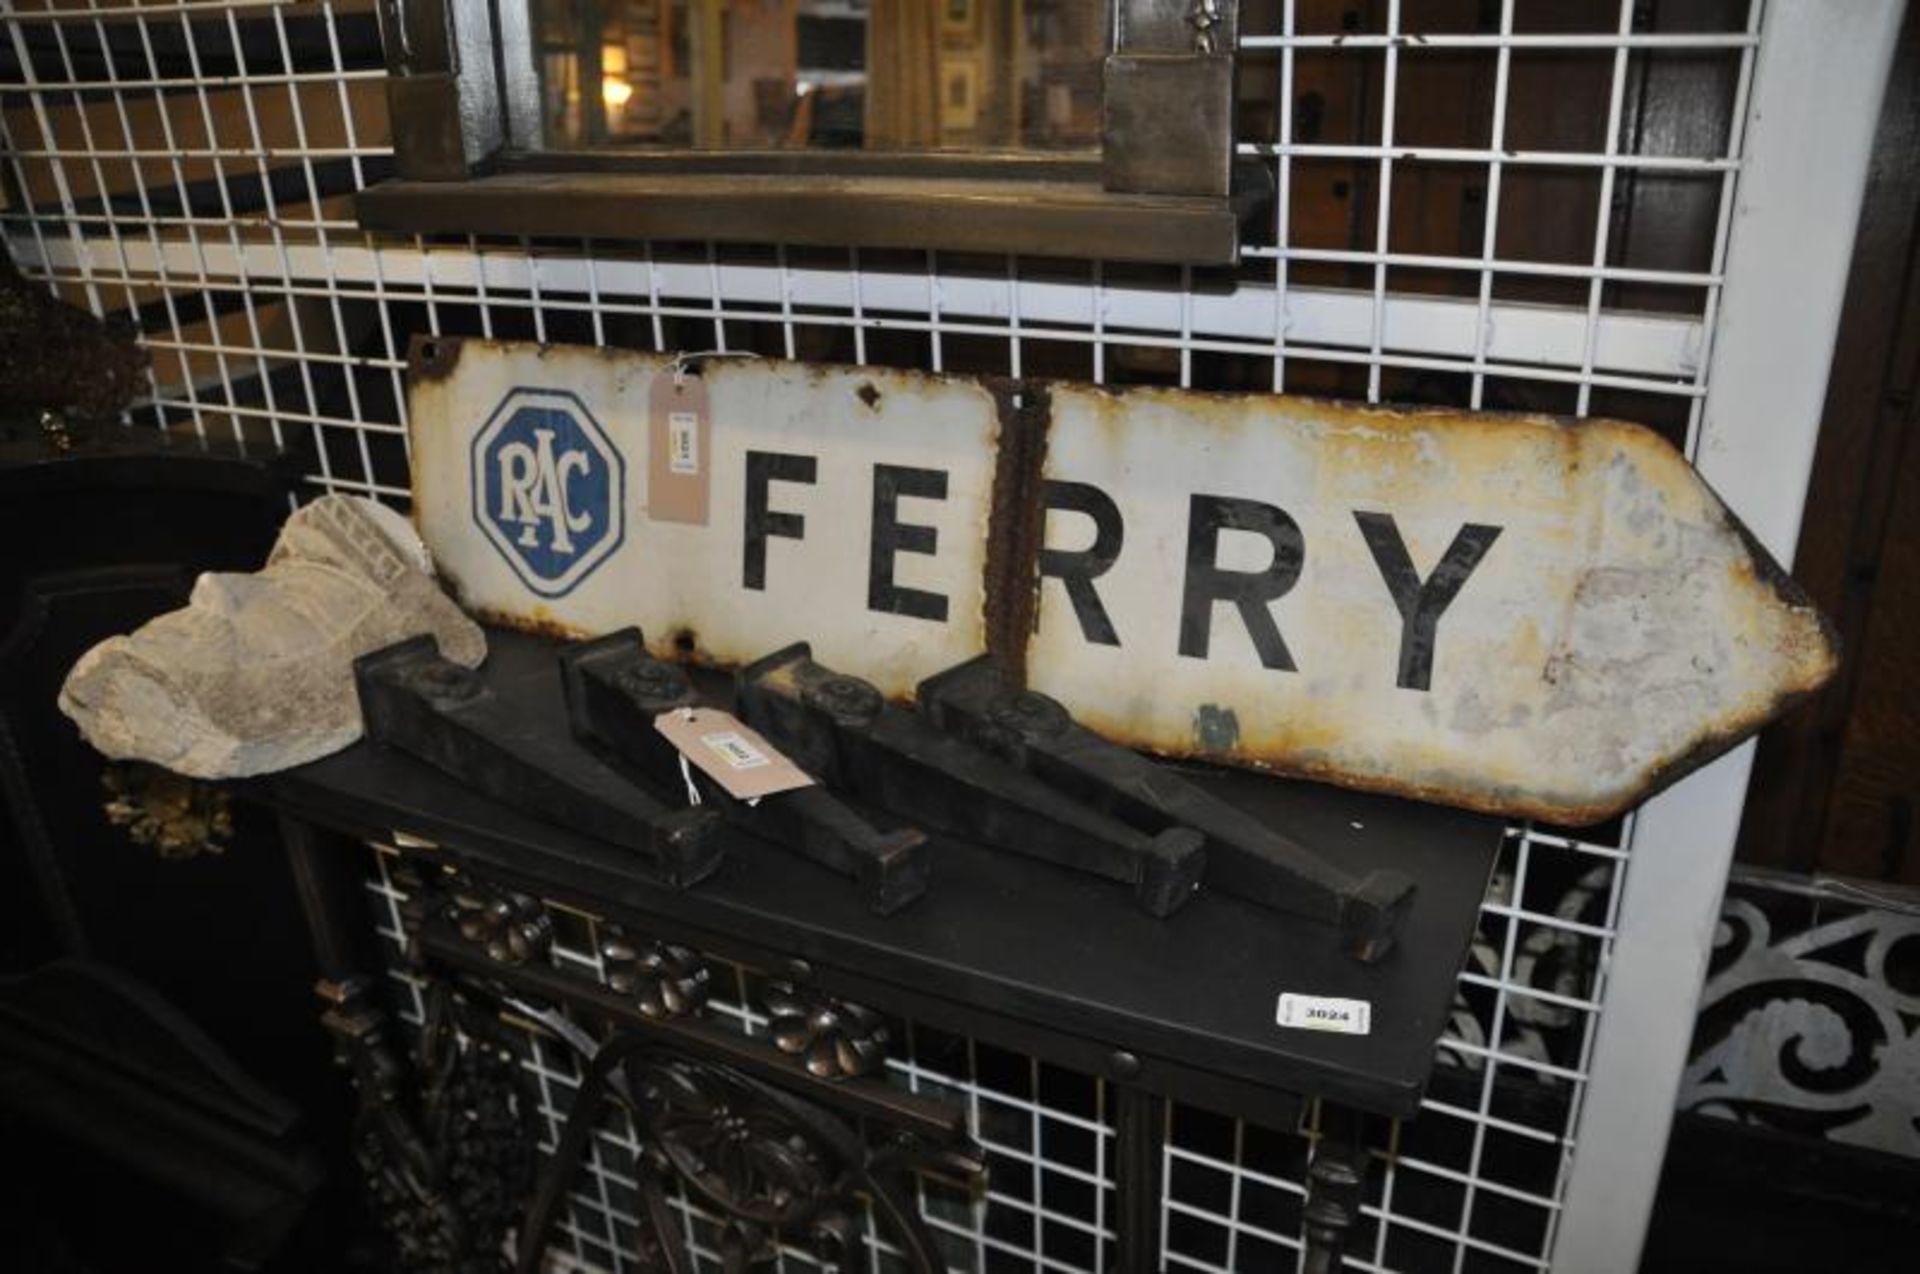 Wrought iron directional sign 'RAC FERRY'